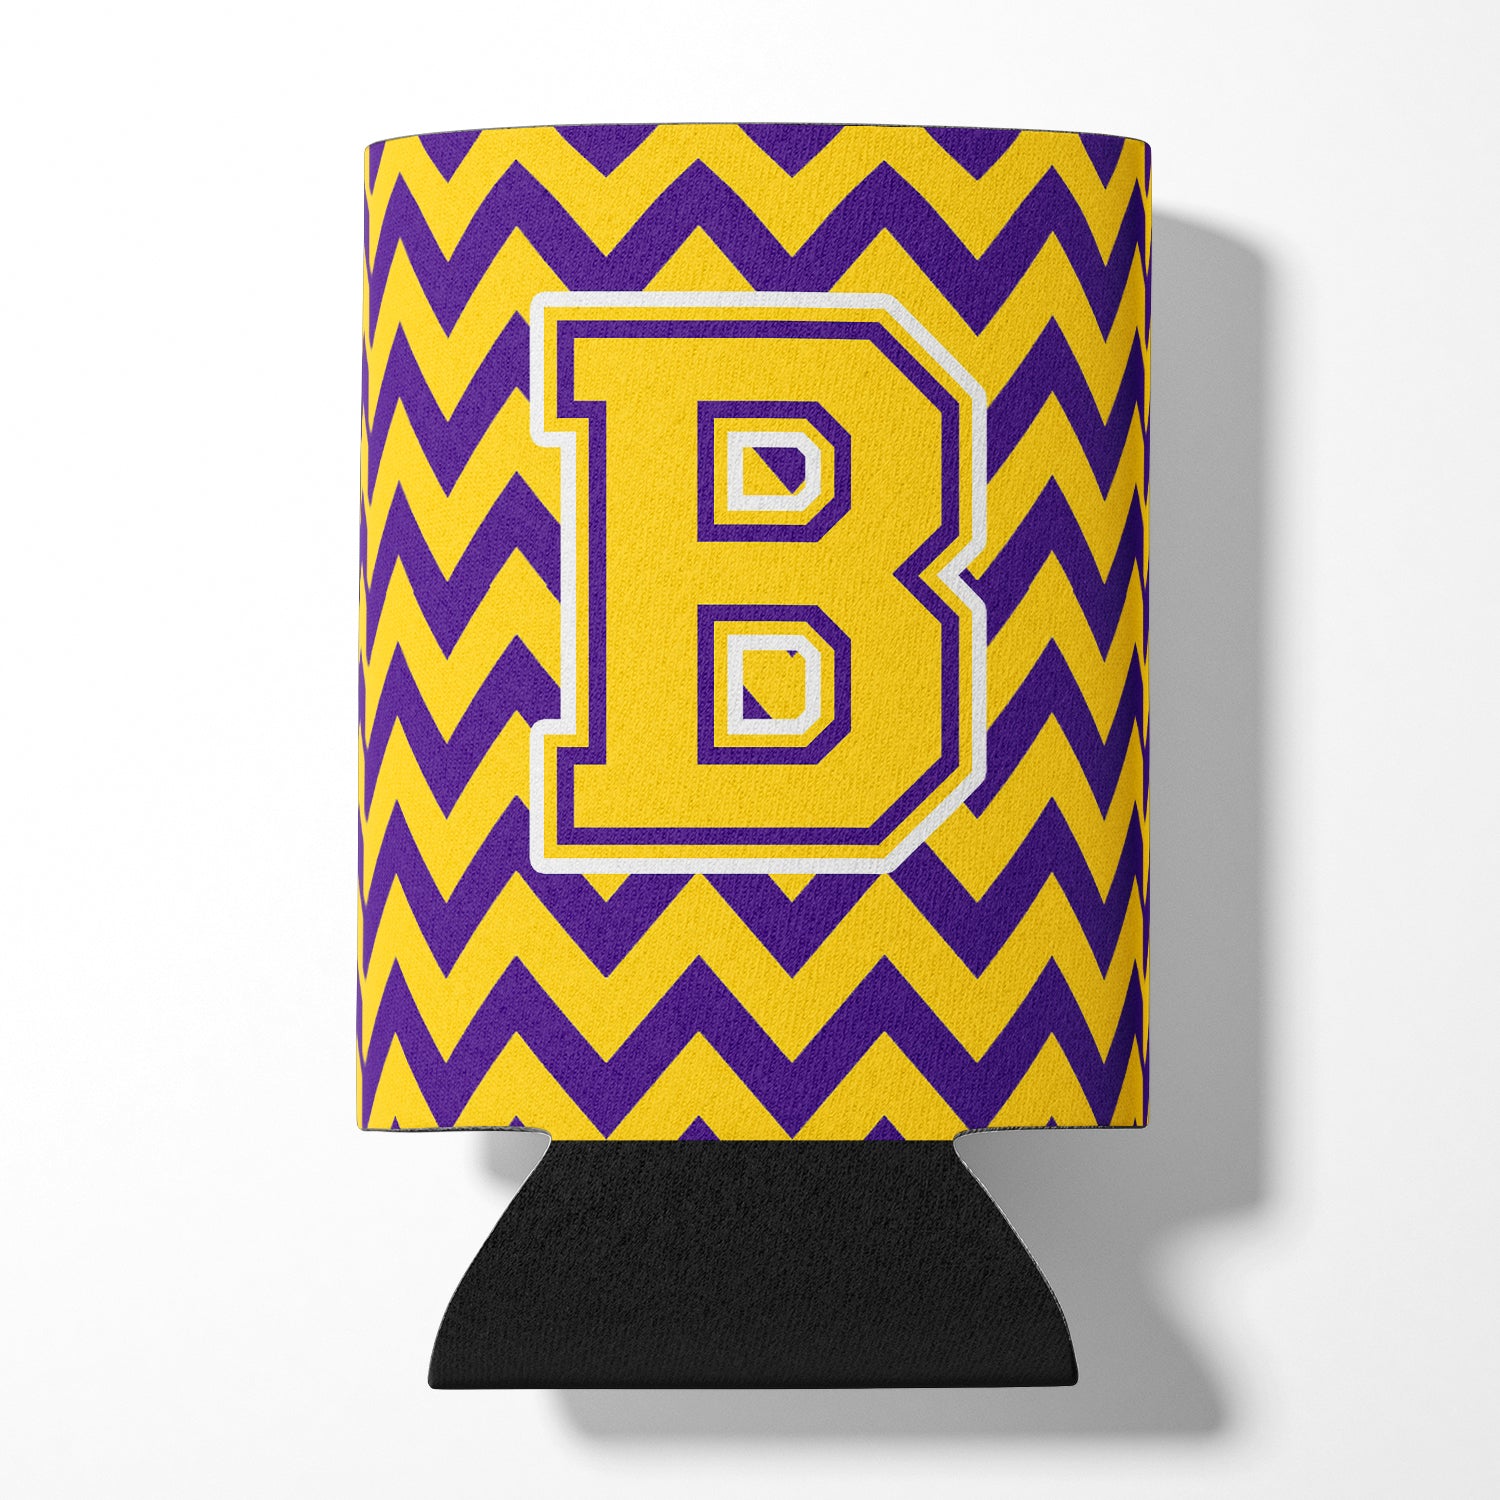 Letter B Chevron Purple and Gold Can or Bottle Hugger CJ1041-BCC.